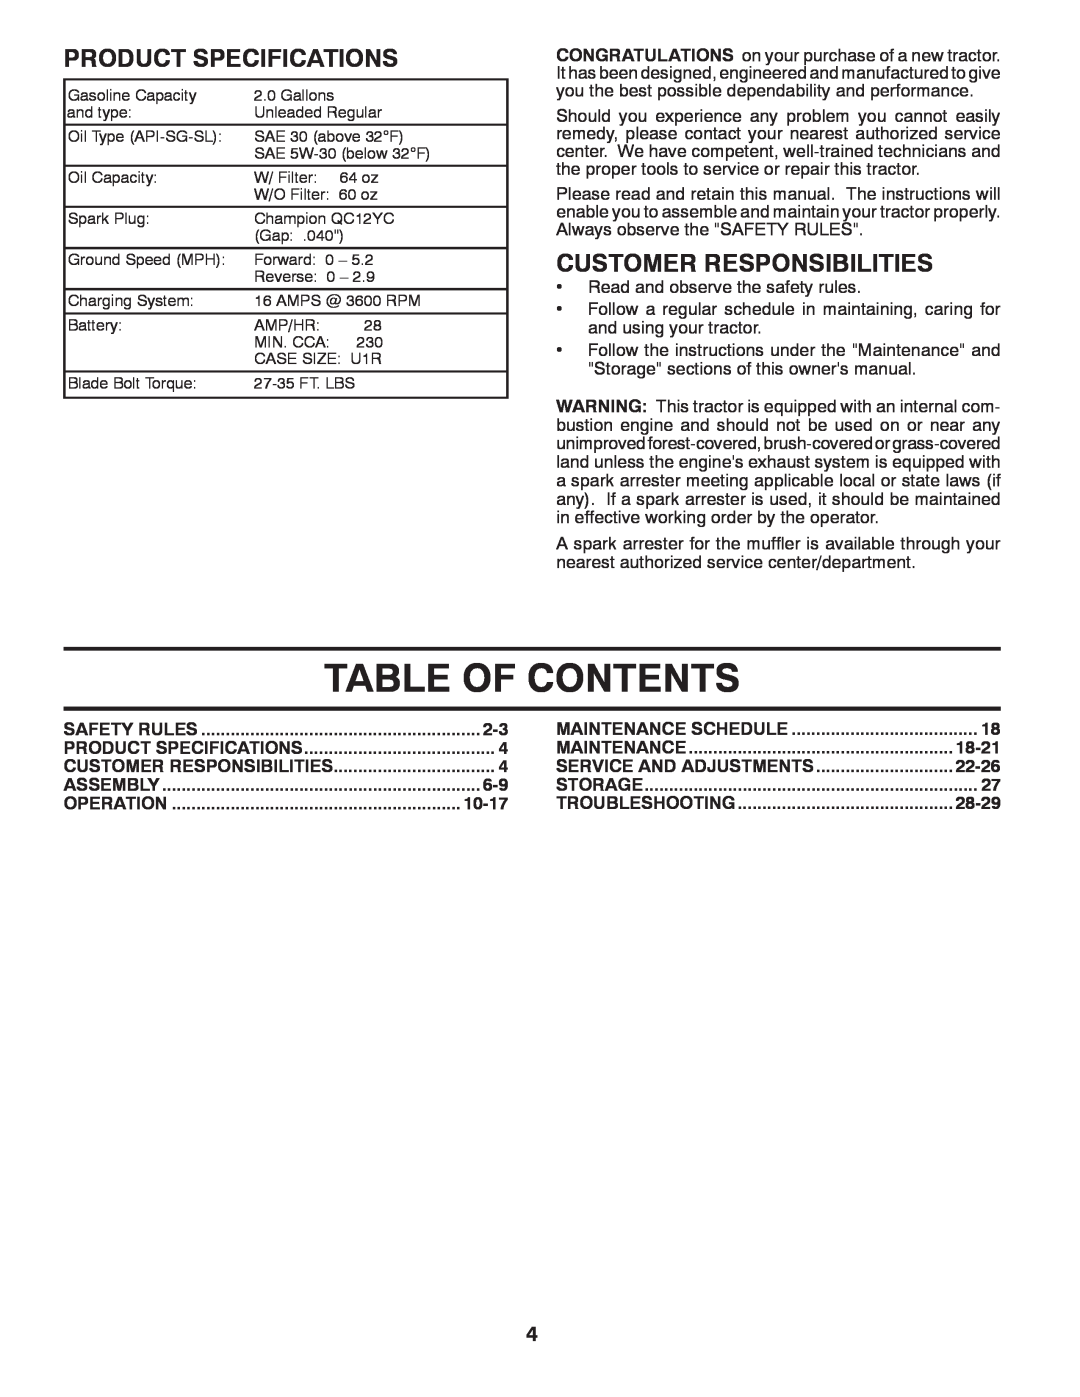 Jonsered LT2220 CMA2 Table Of Contents, Product Specifications, Customer Responsibilities, 10-17, 18-21, 22-26, 28-29 